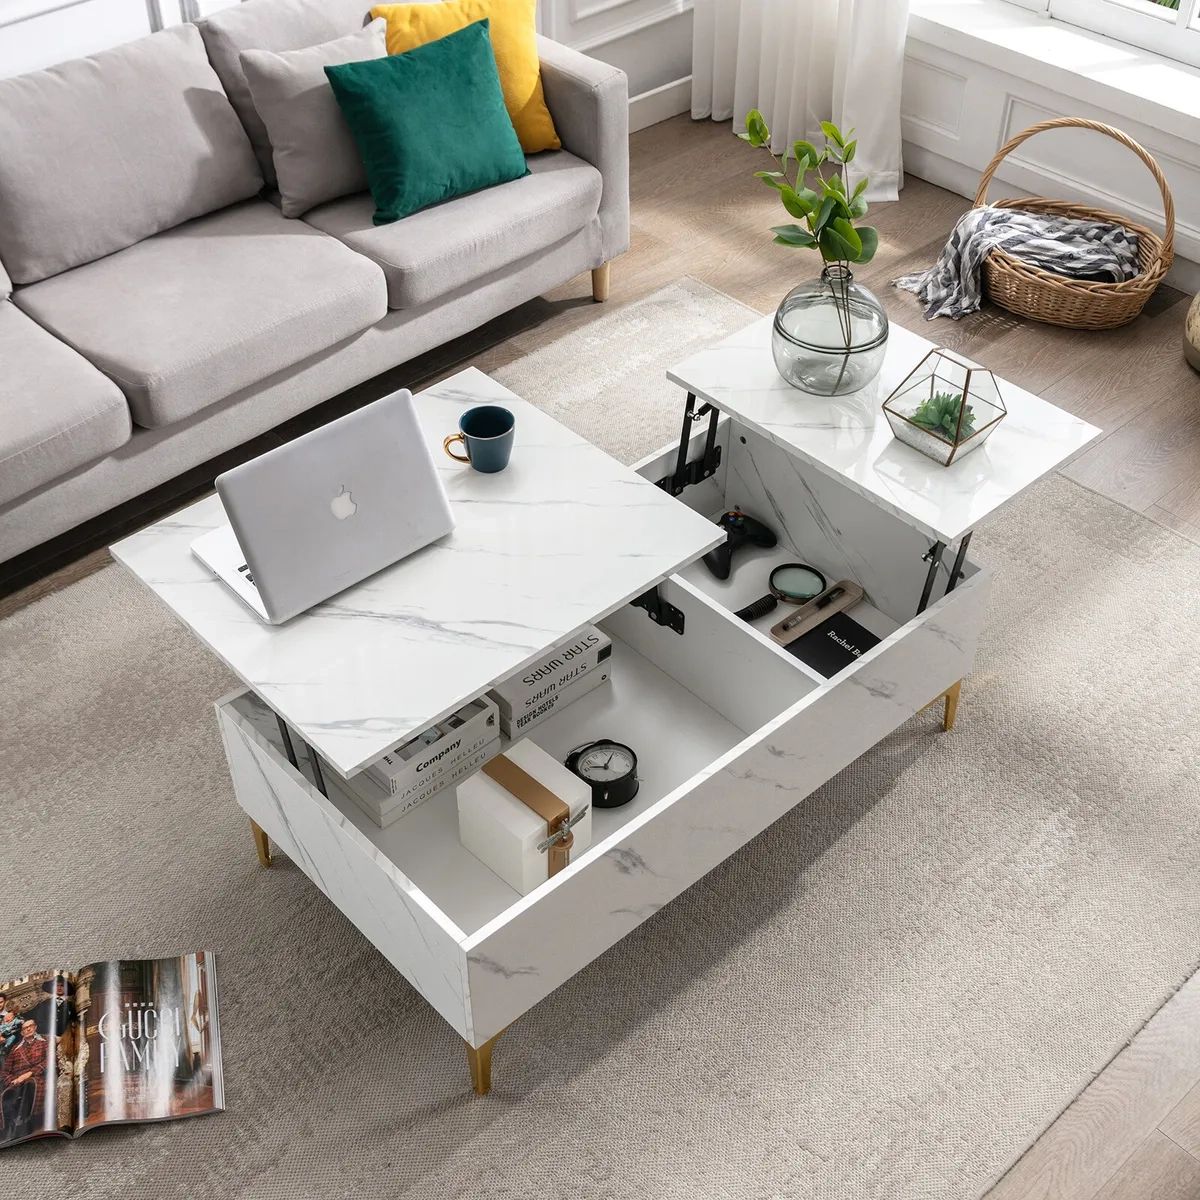 Modern White 43"Lift Top Coffee Table High Gloss W/Storage Rectangle Living  Room | Ebay Pertaining To High Gloss Lift Top Coffee Tables (View 2 of 15)